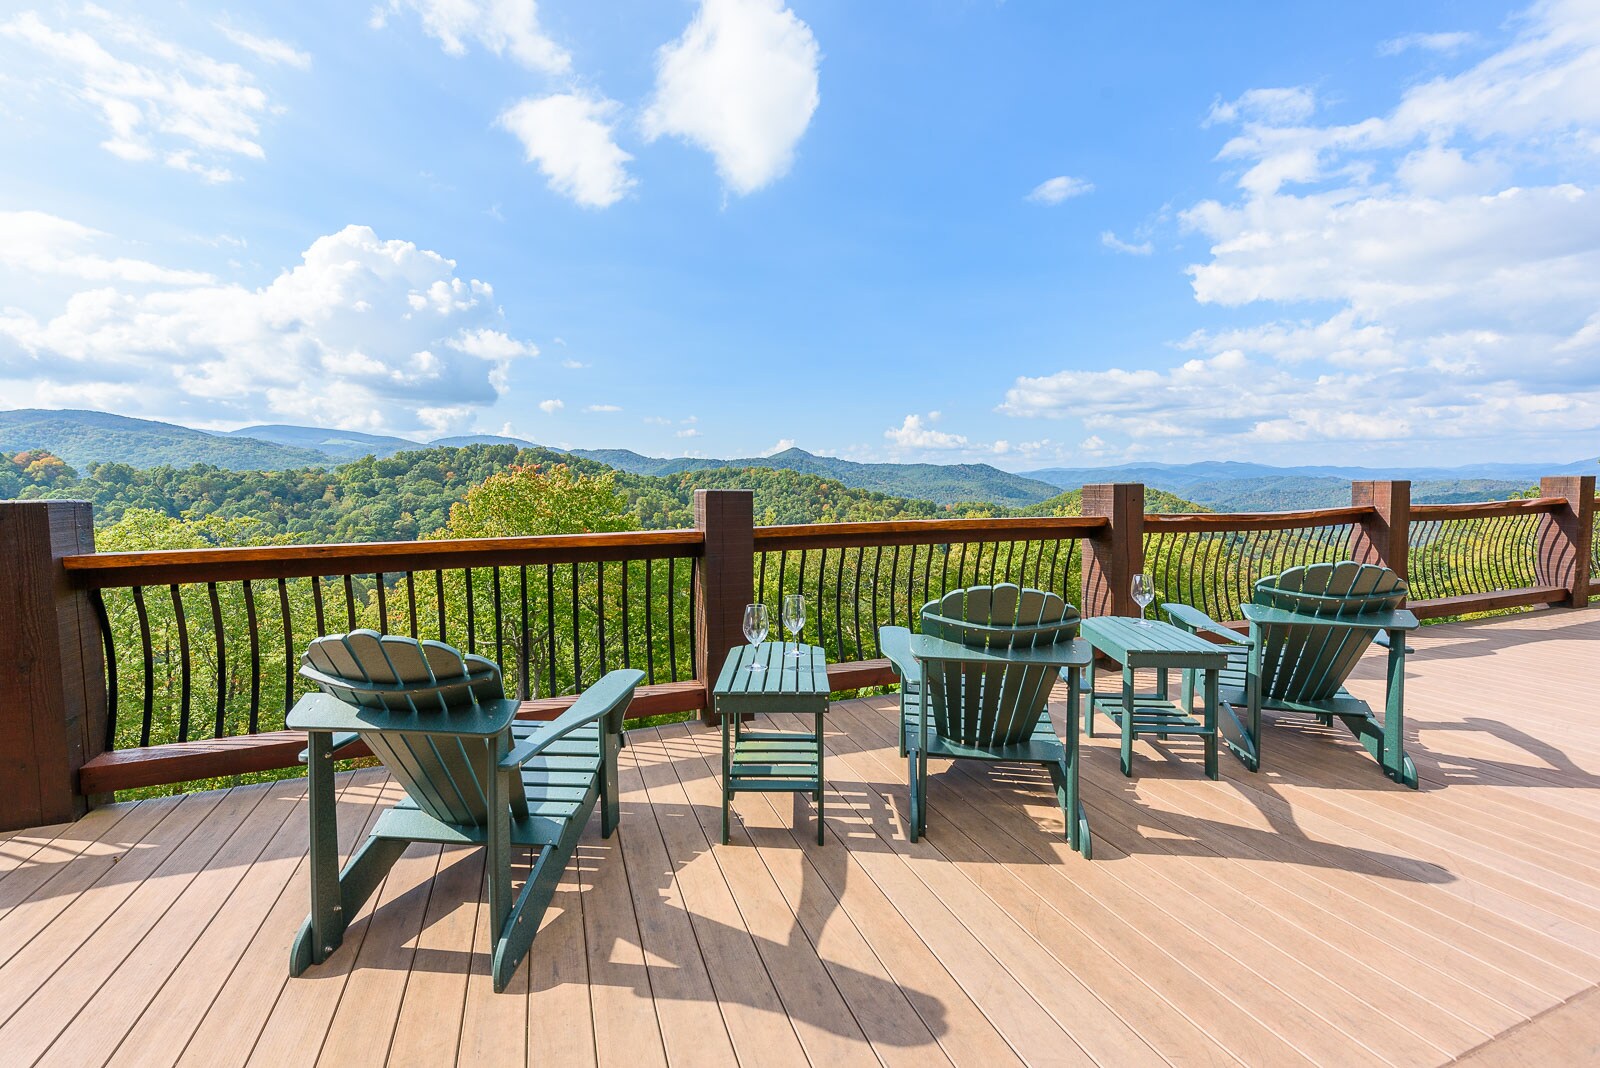 Relax on the Deck and Enjoy Unmatched Mountain Views!